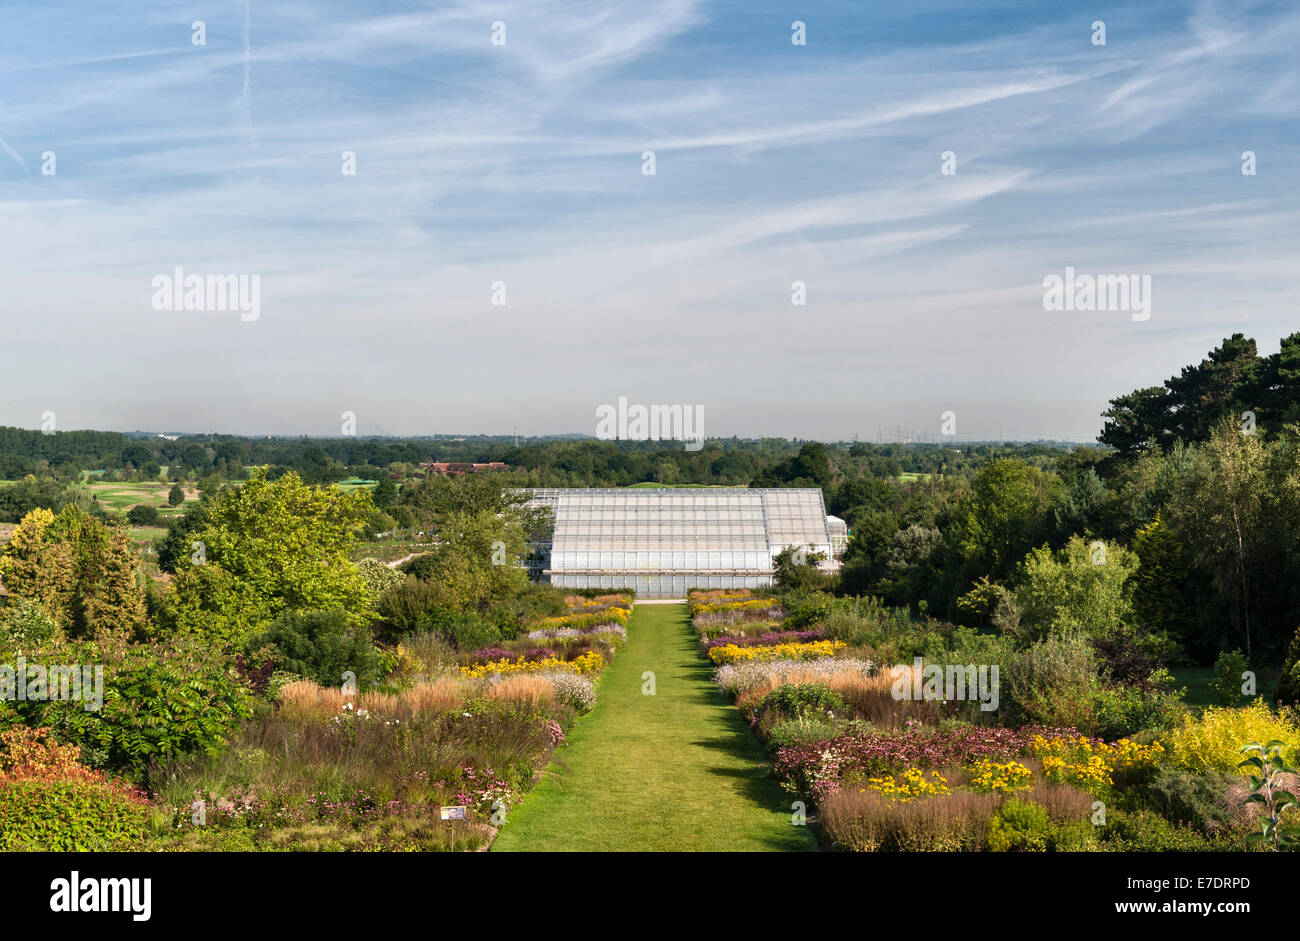 The Royal Horticultural Society (RHS) gardens, Wisley, Surrey, UK. View down the Glasshouse Borders in September Stock Photo